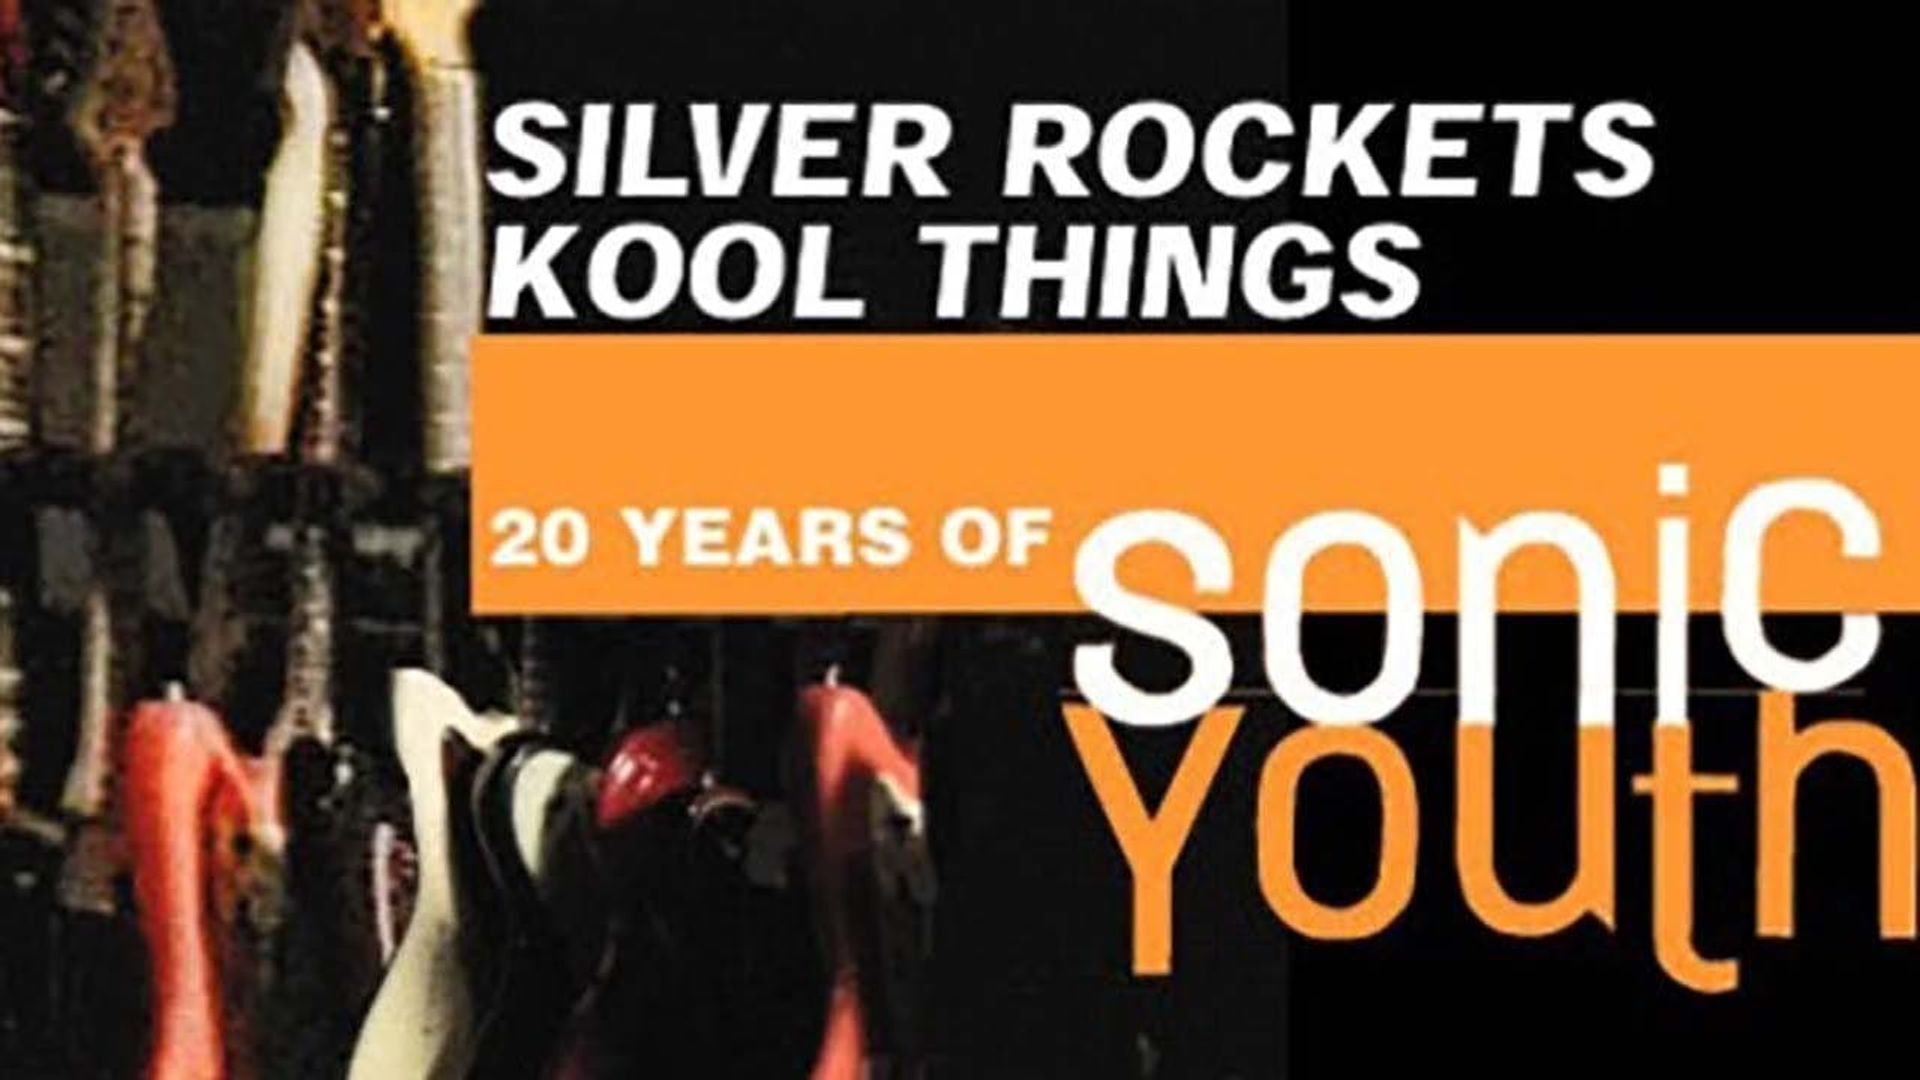 Silver Rockets/Kool Things: 20 Years of Sonic Youth background